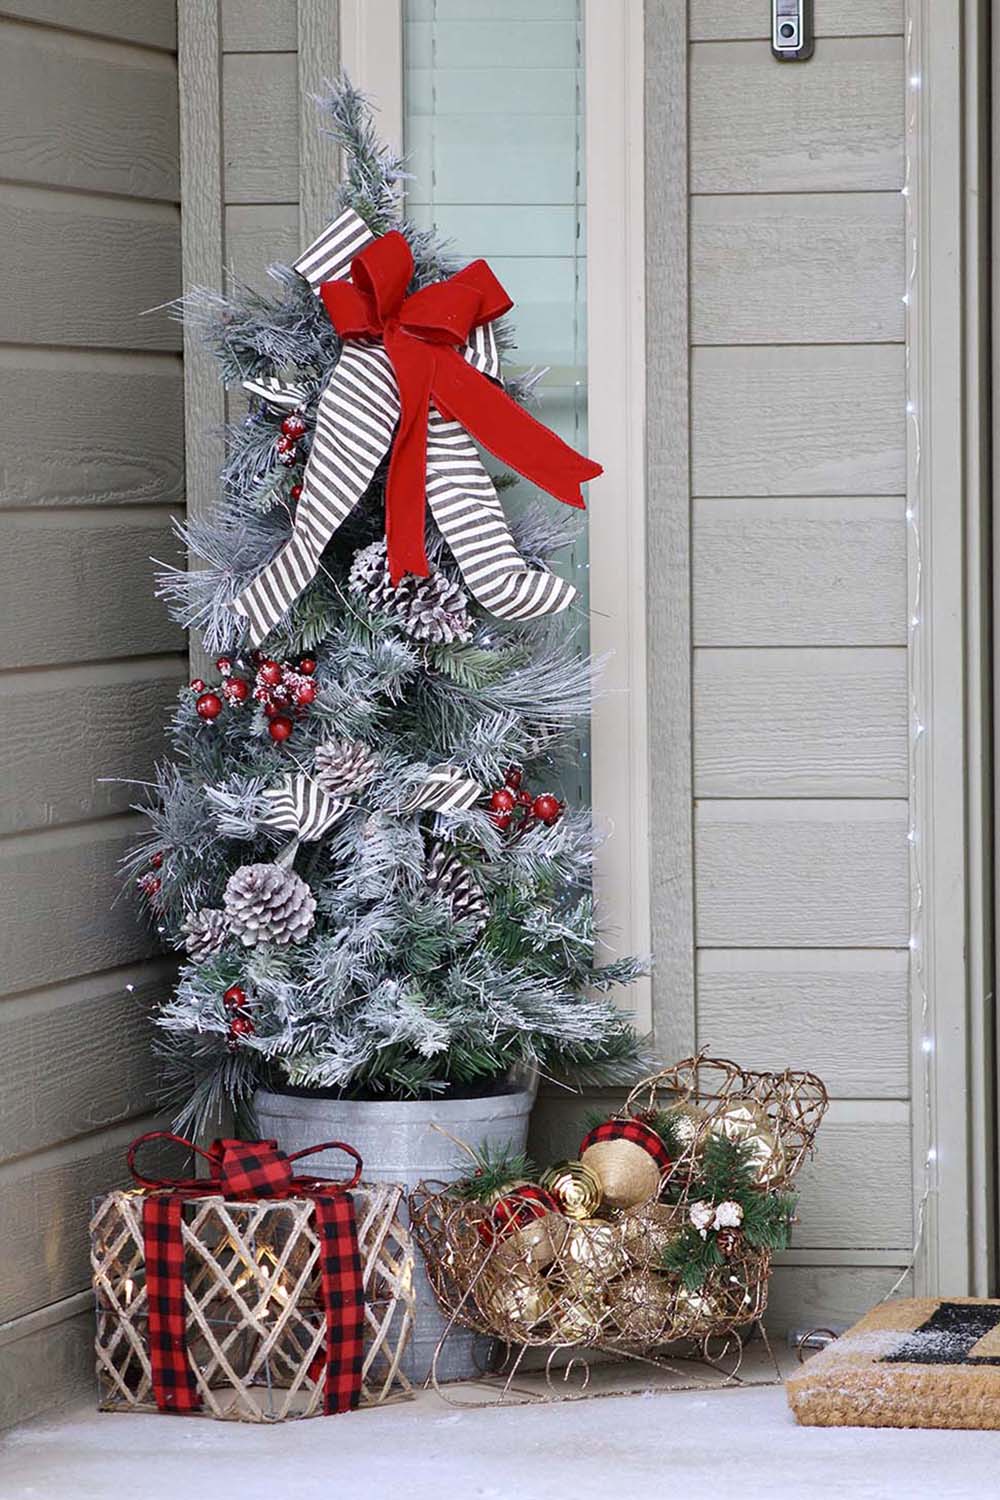 The corner of a front porch decorated with a porch Christmas tree, lighted holiday gift box, and ornament filled sleigh.